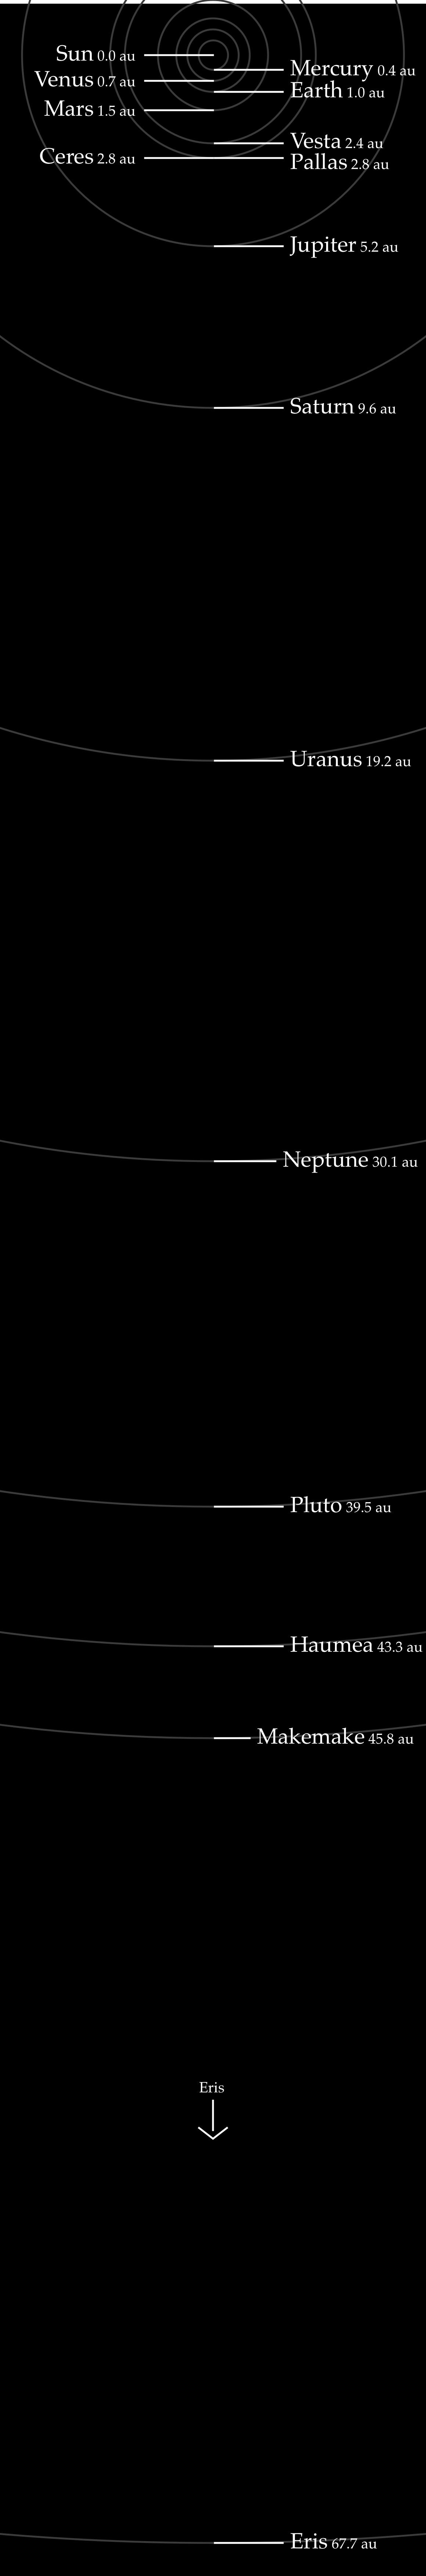 Solar System with proportional distances